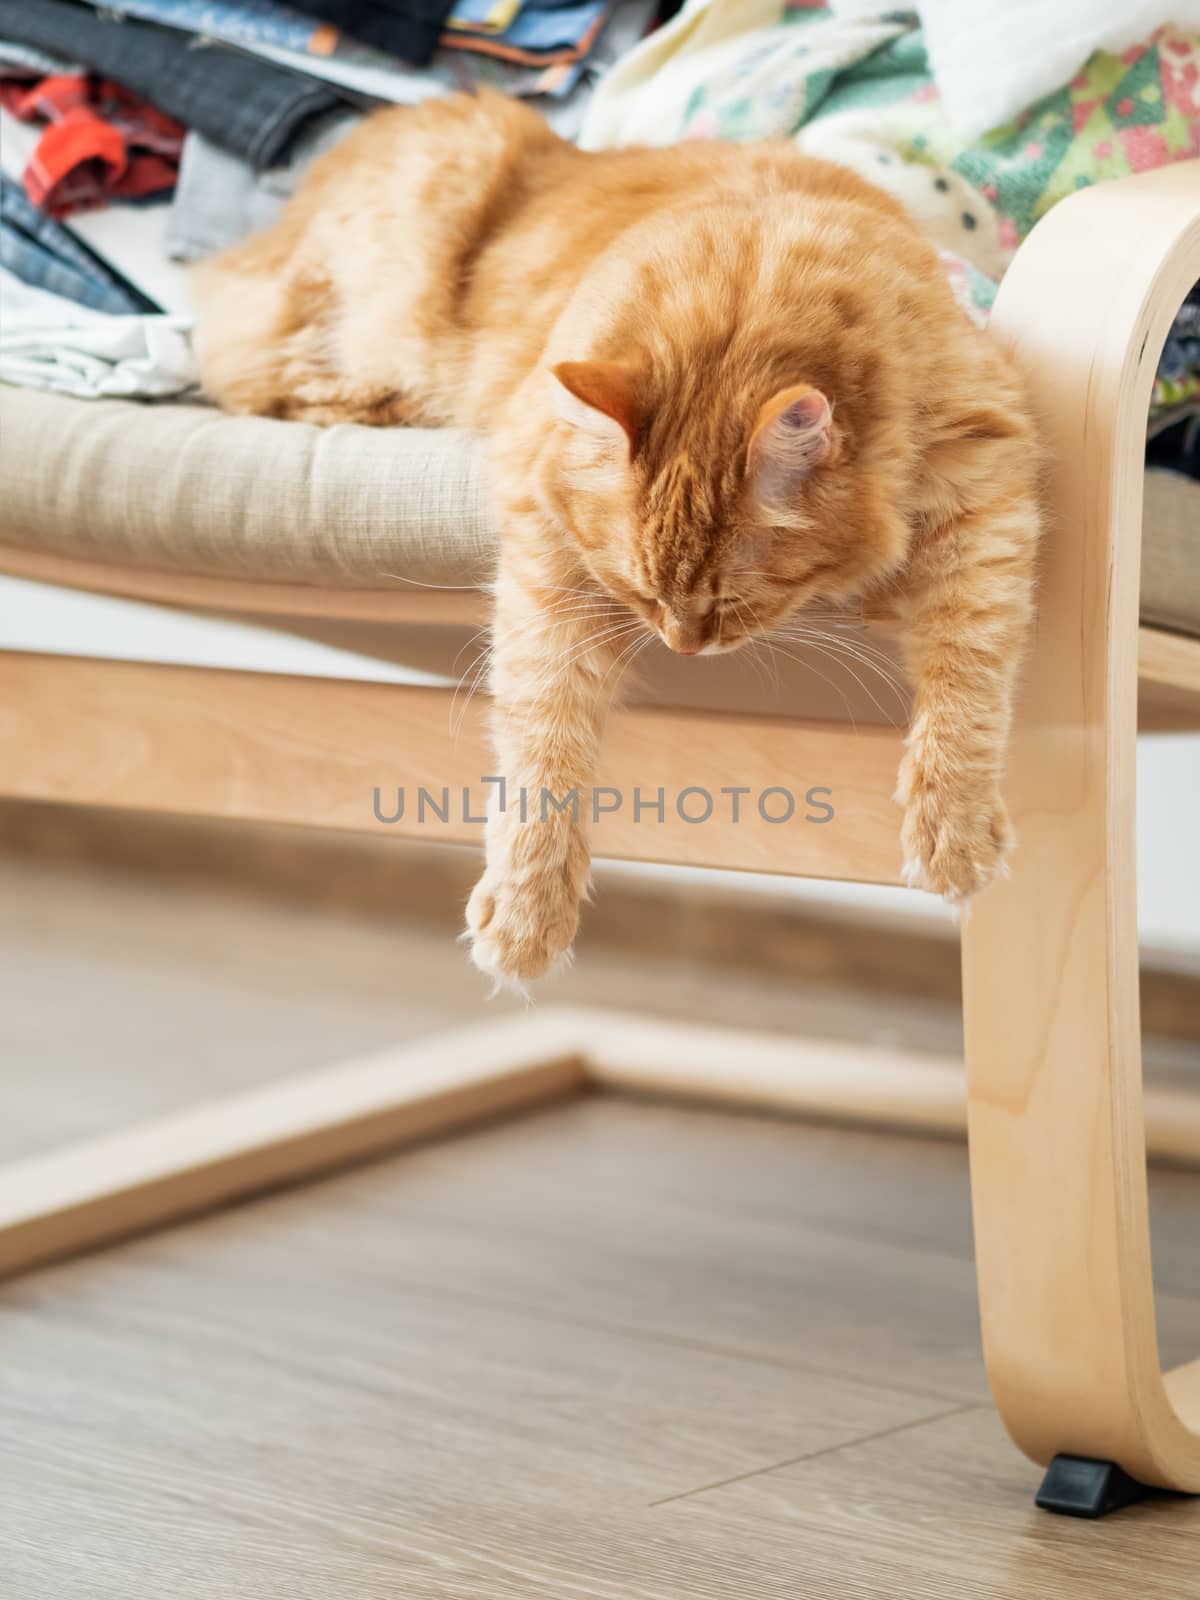 Cute ginger cat is lying on beige chair. Pile of crumpled clothes behind fluffy pet. by aksenovko